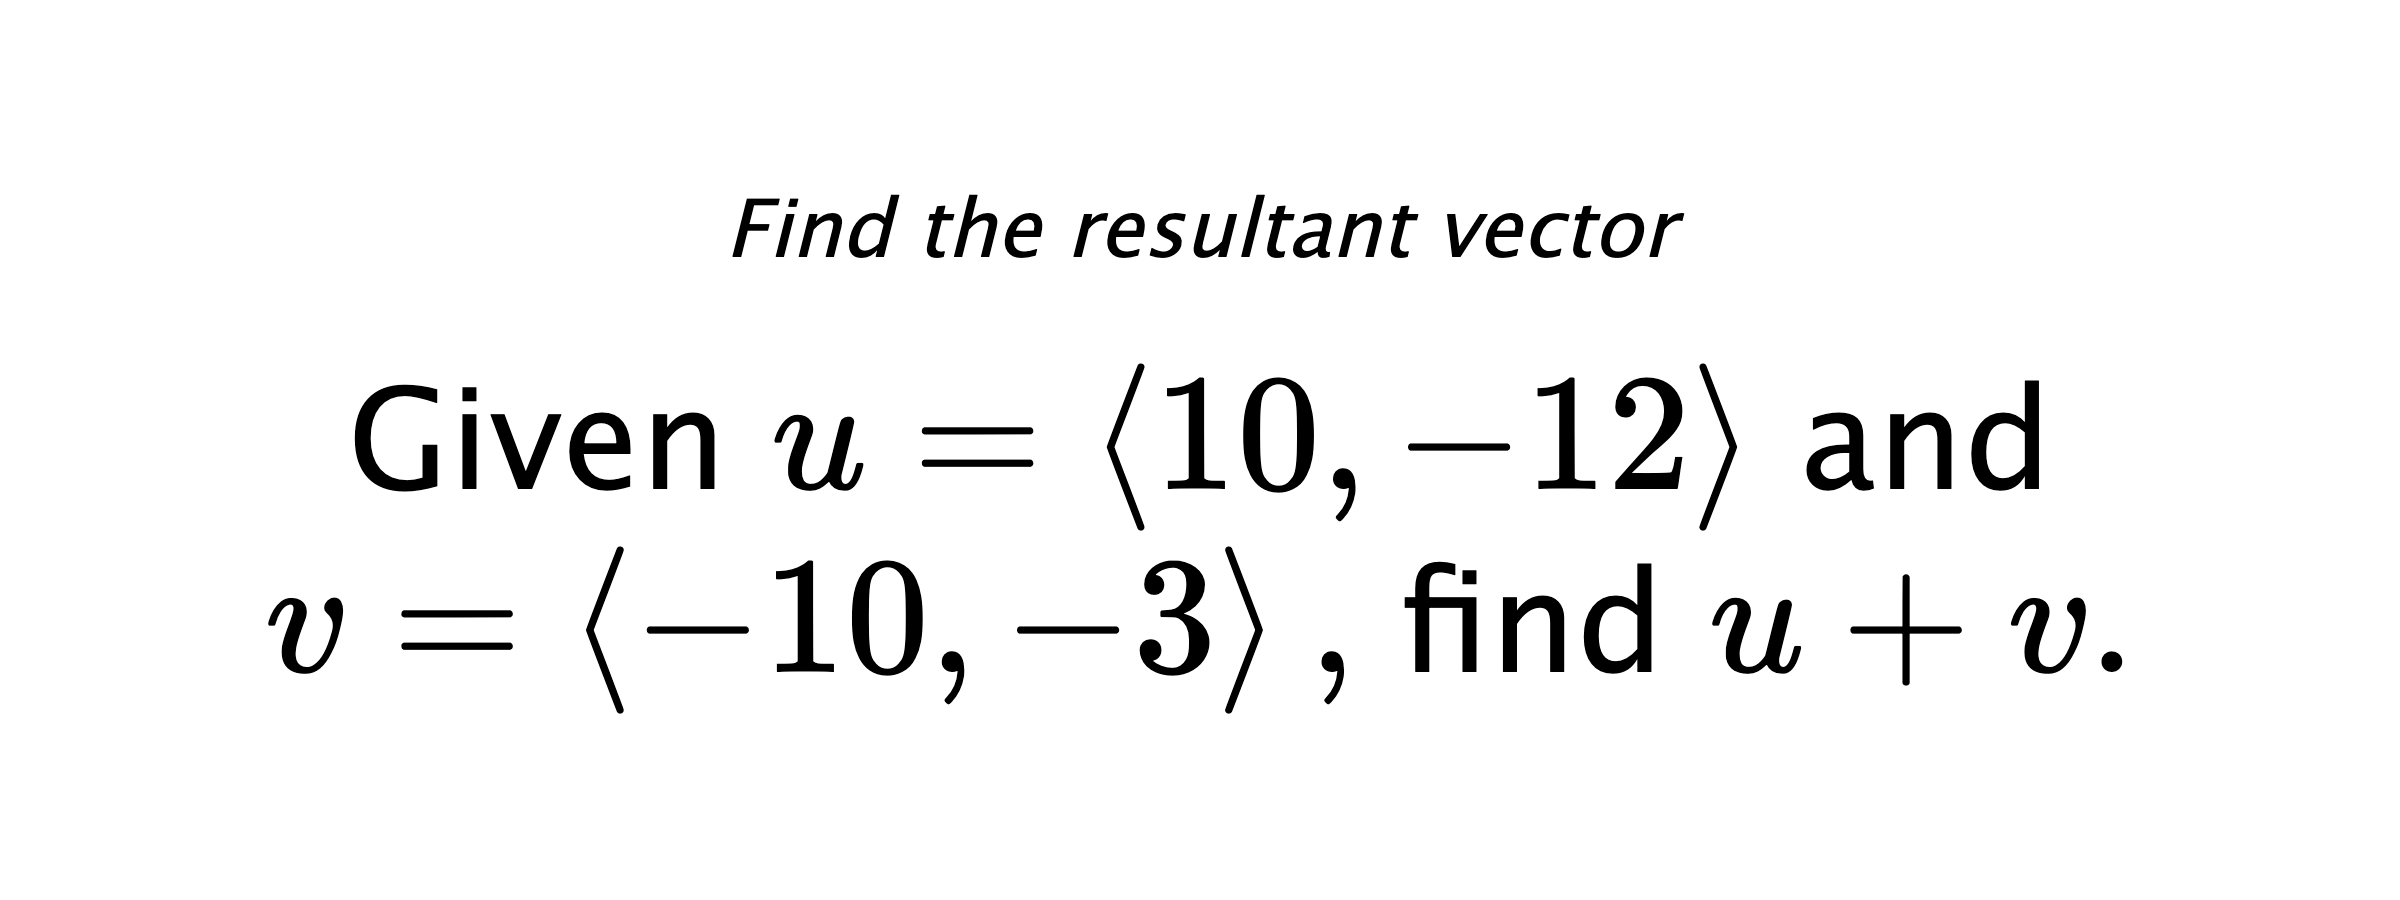 Find the resultant vector Given $ u = \left< 10,-12 \right> $ and $ v = \left< -10,-3 \right> ,$ find $ u+v .$